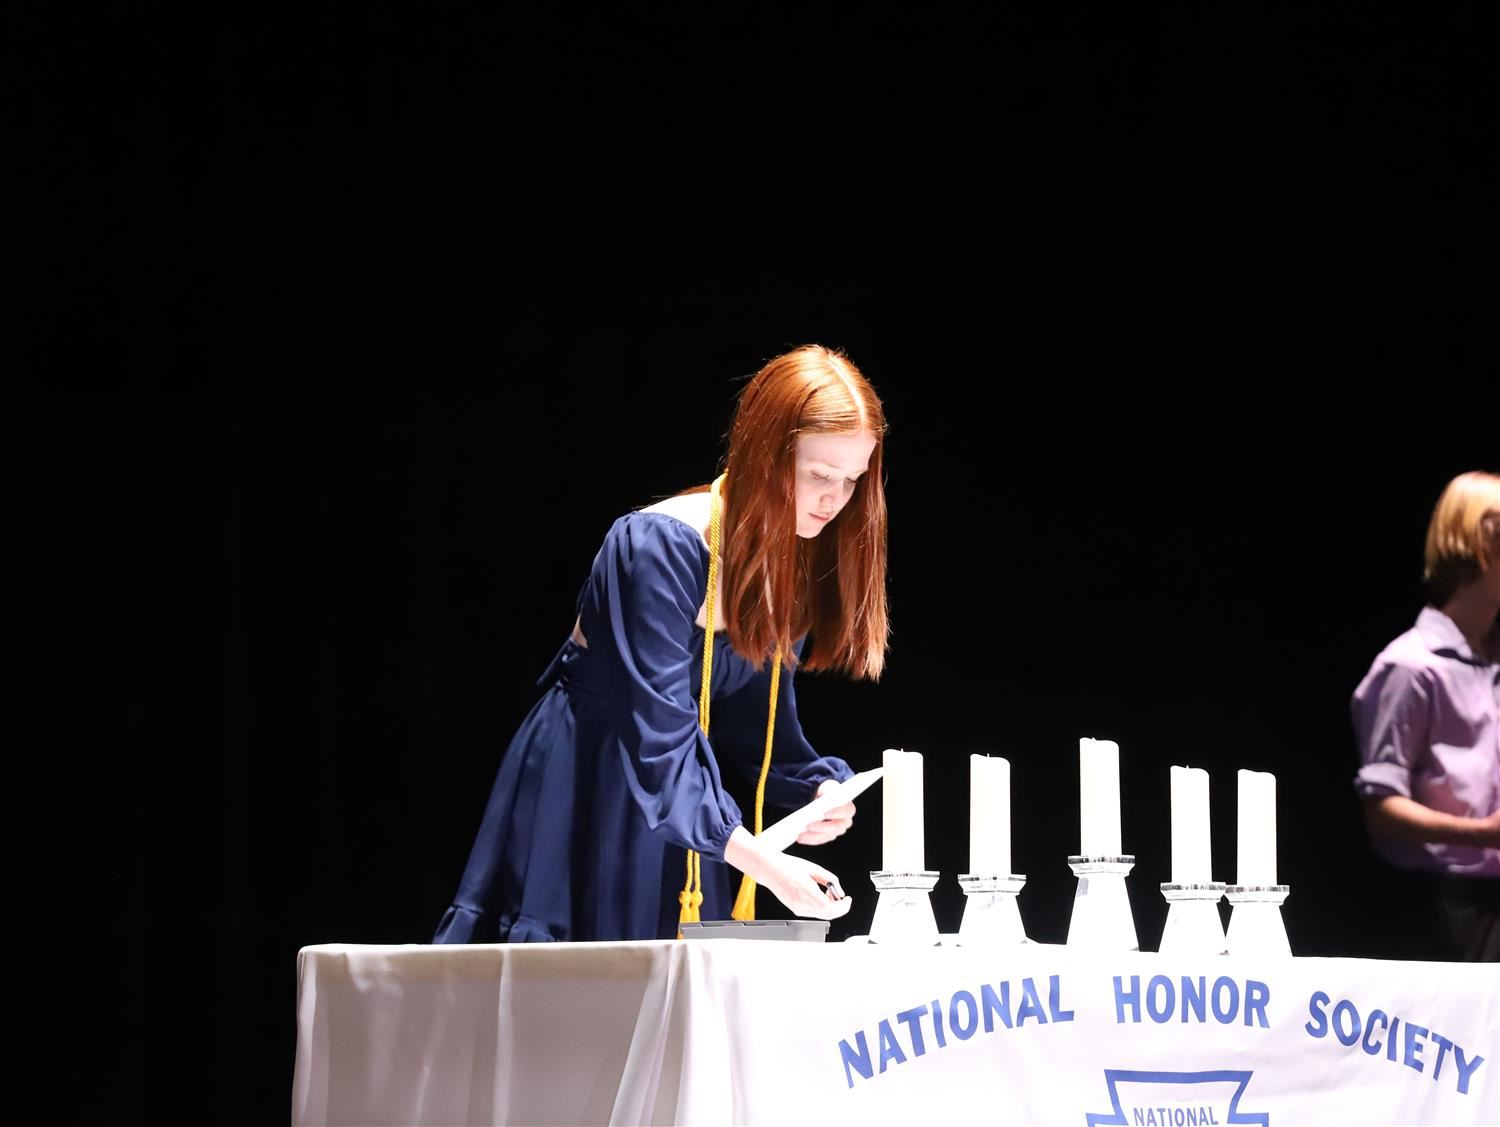 GISH student signing the NHS induction book.